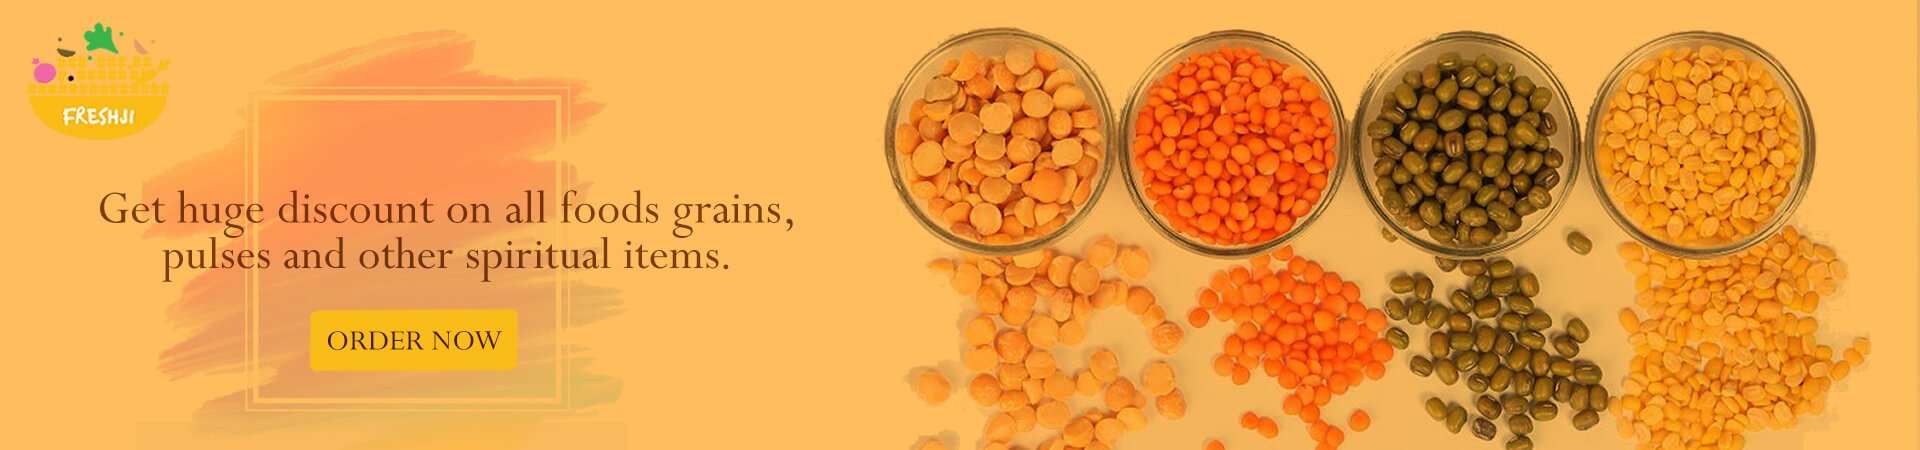 Get Huge Discount on All Foods Grains Pulses and other spiritual item with freshji